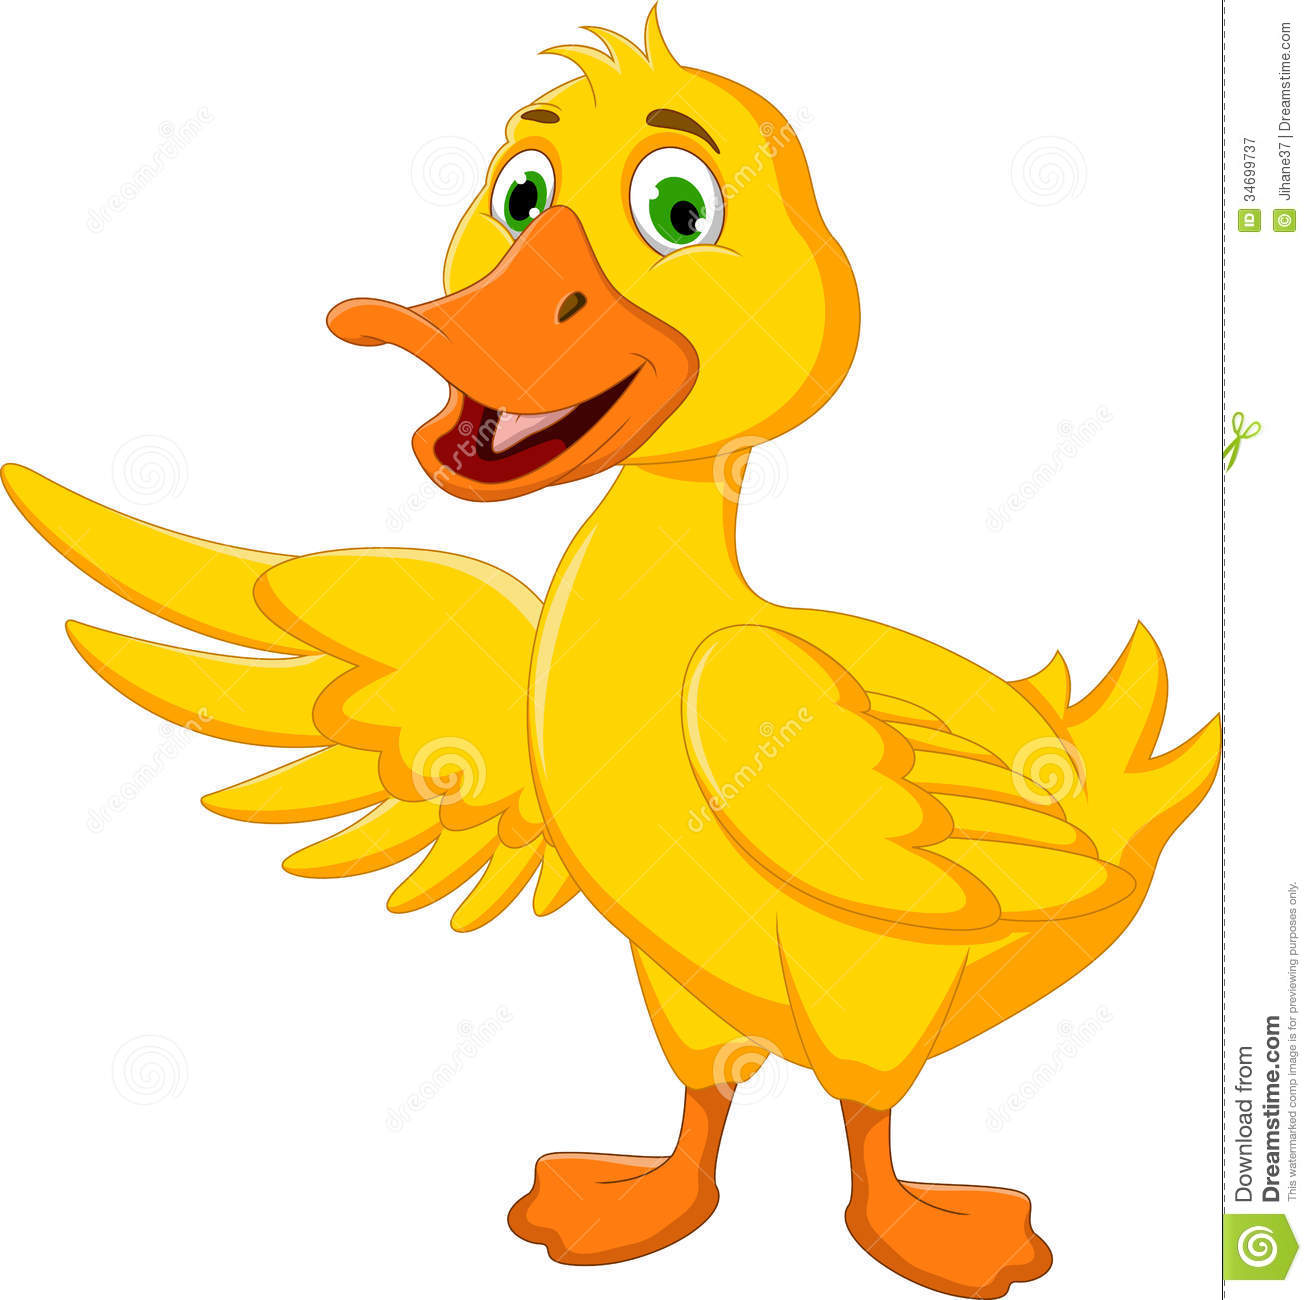 Duckling clipart farm thing. Funny duck 